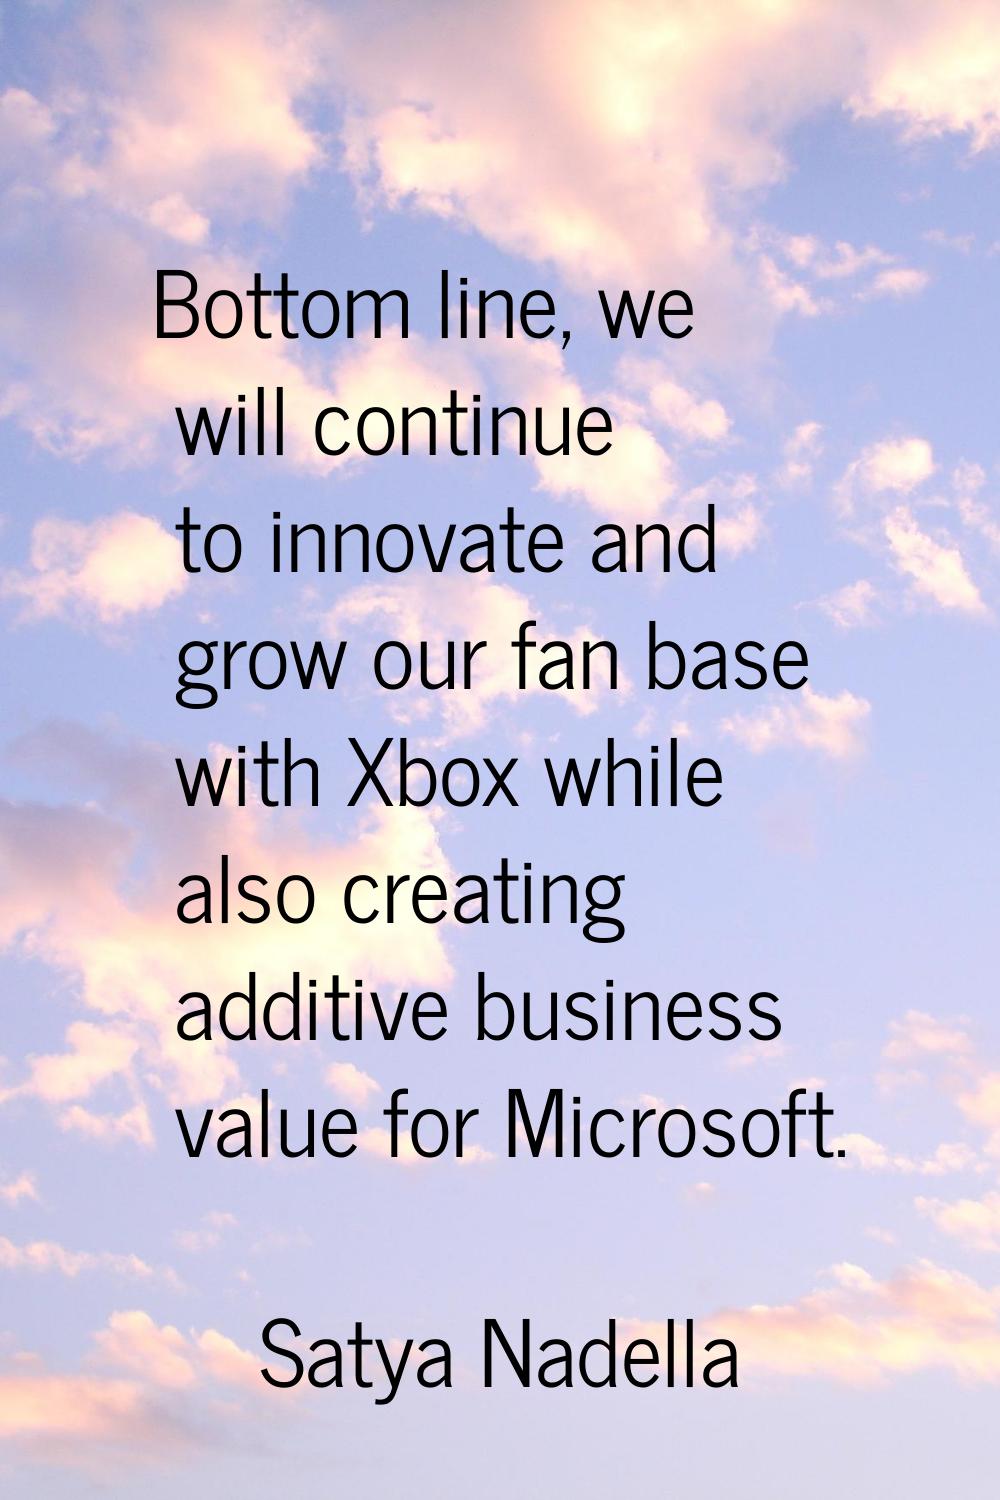 Bottom line, we will continue to innovate and grow our fan base with Xbox while also creating addit